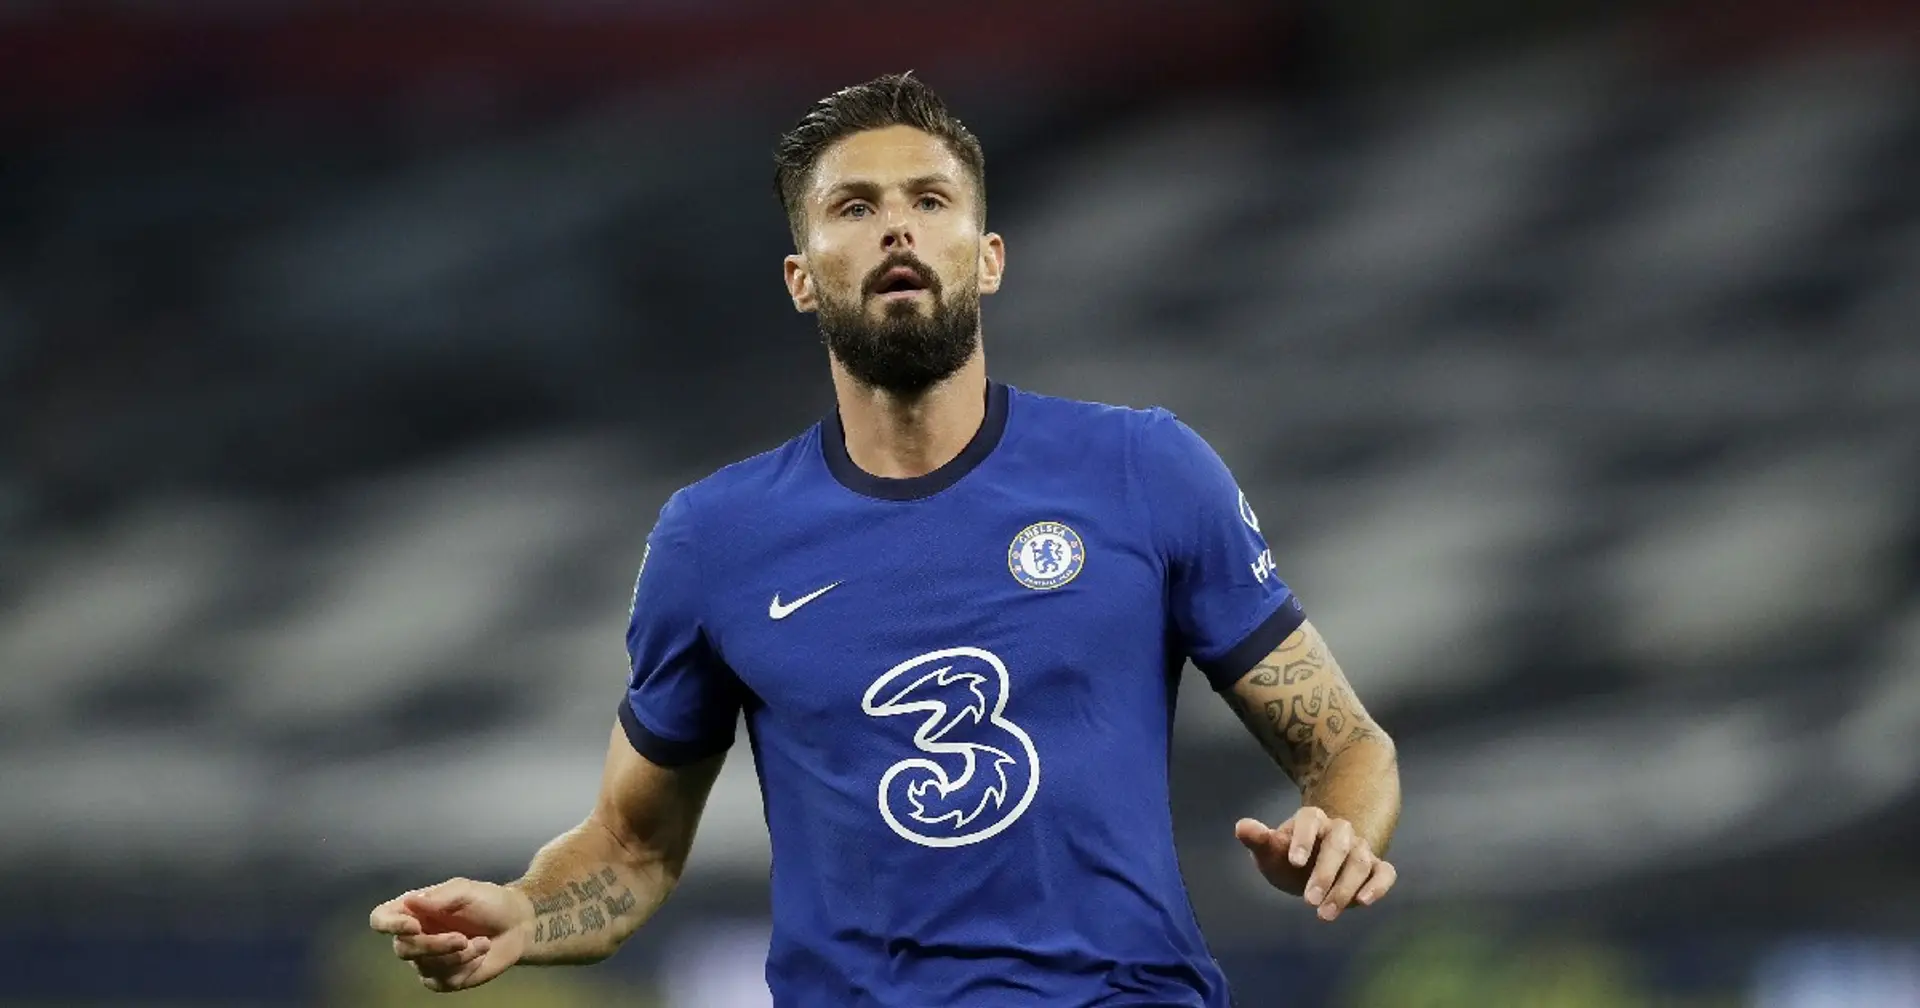 'I will make a decision in January': Giroud admits worries over Chelsea role